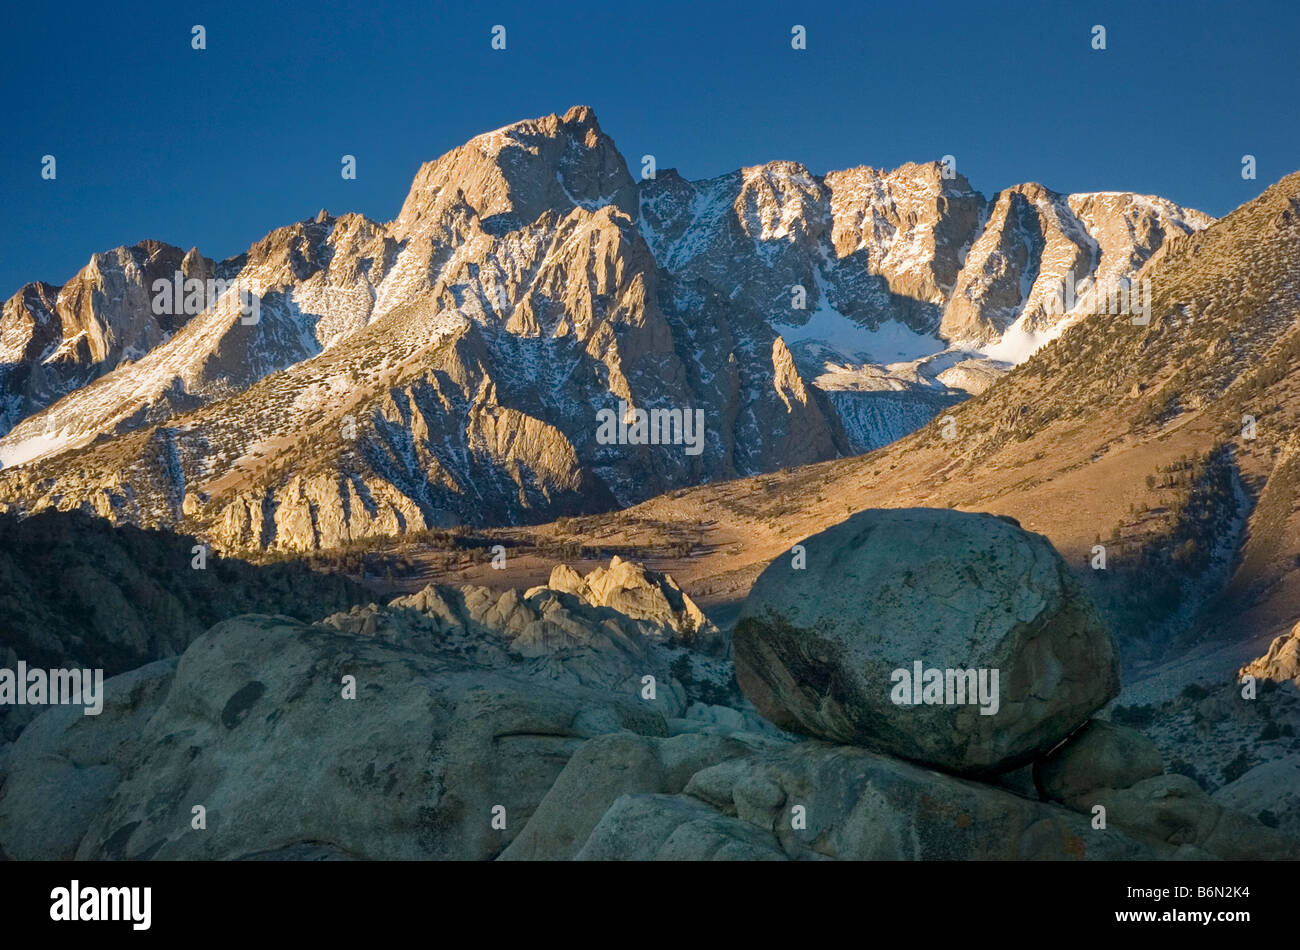 Mount Humphries from Buttermilk Boulders, Bishop, California Stock Photo